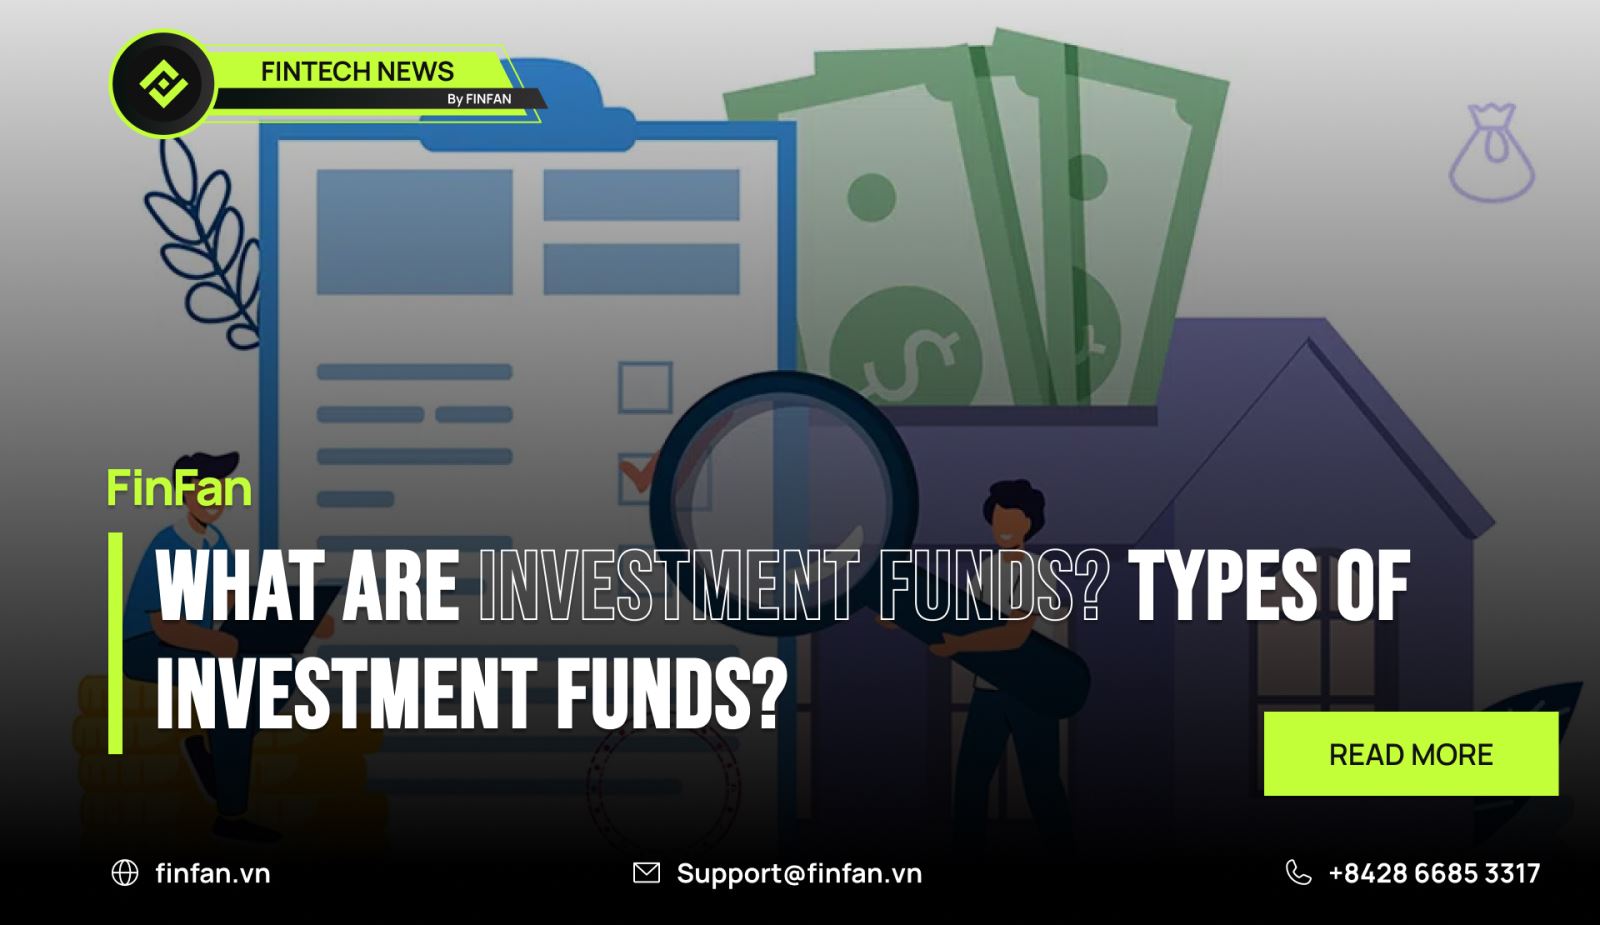 What are Investment Funds? Types of Investment Funds?